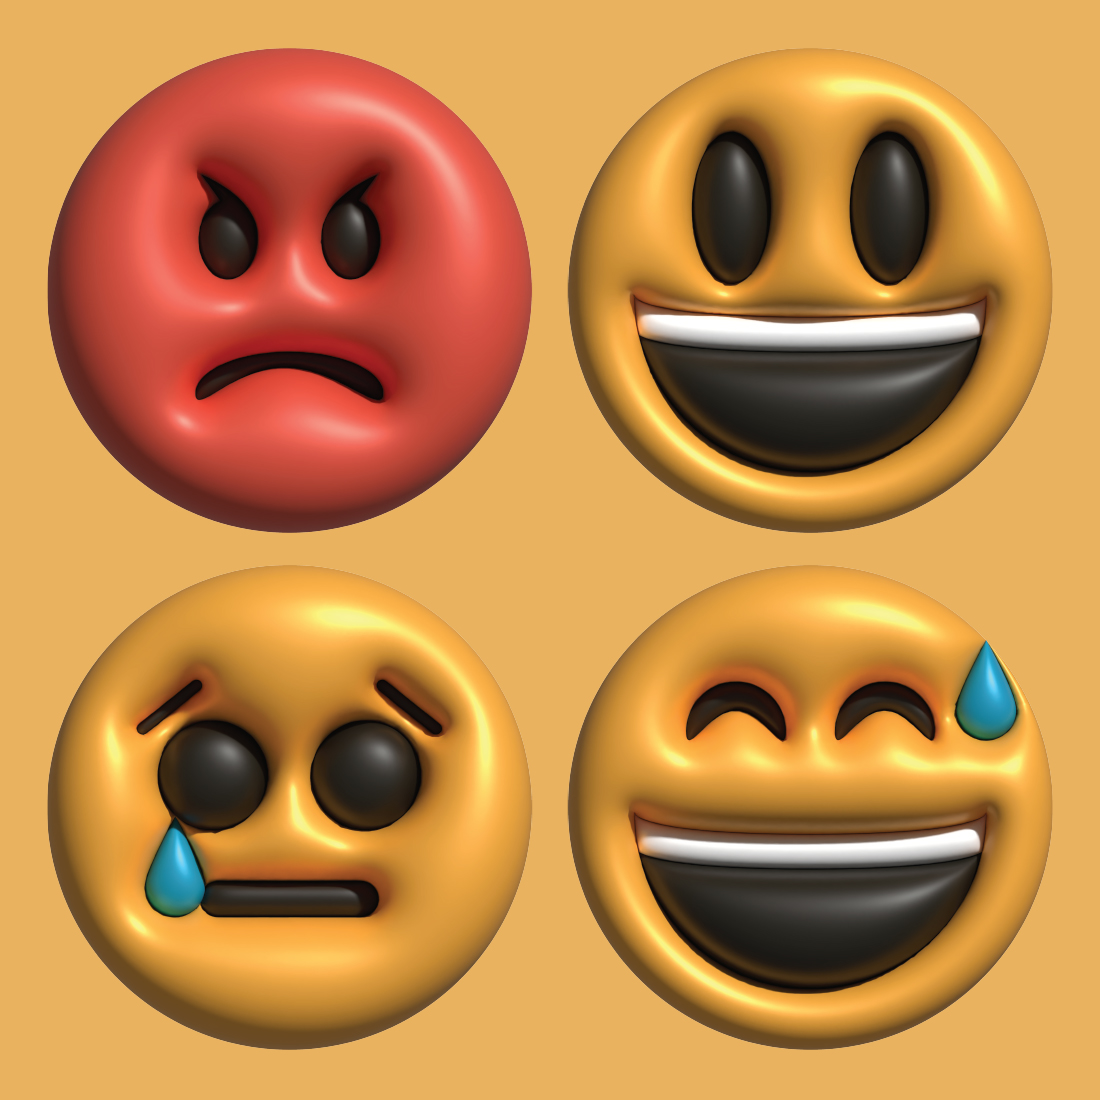 Set of four emoticions with different expressions.